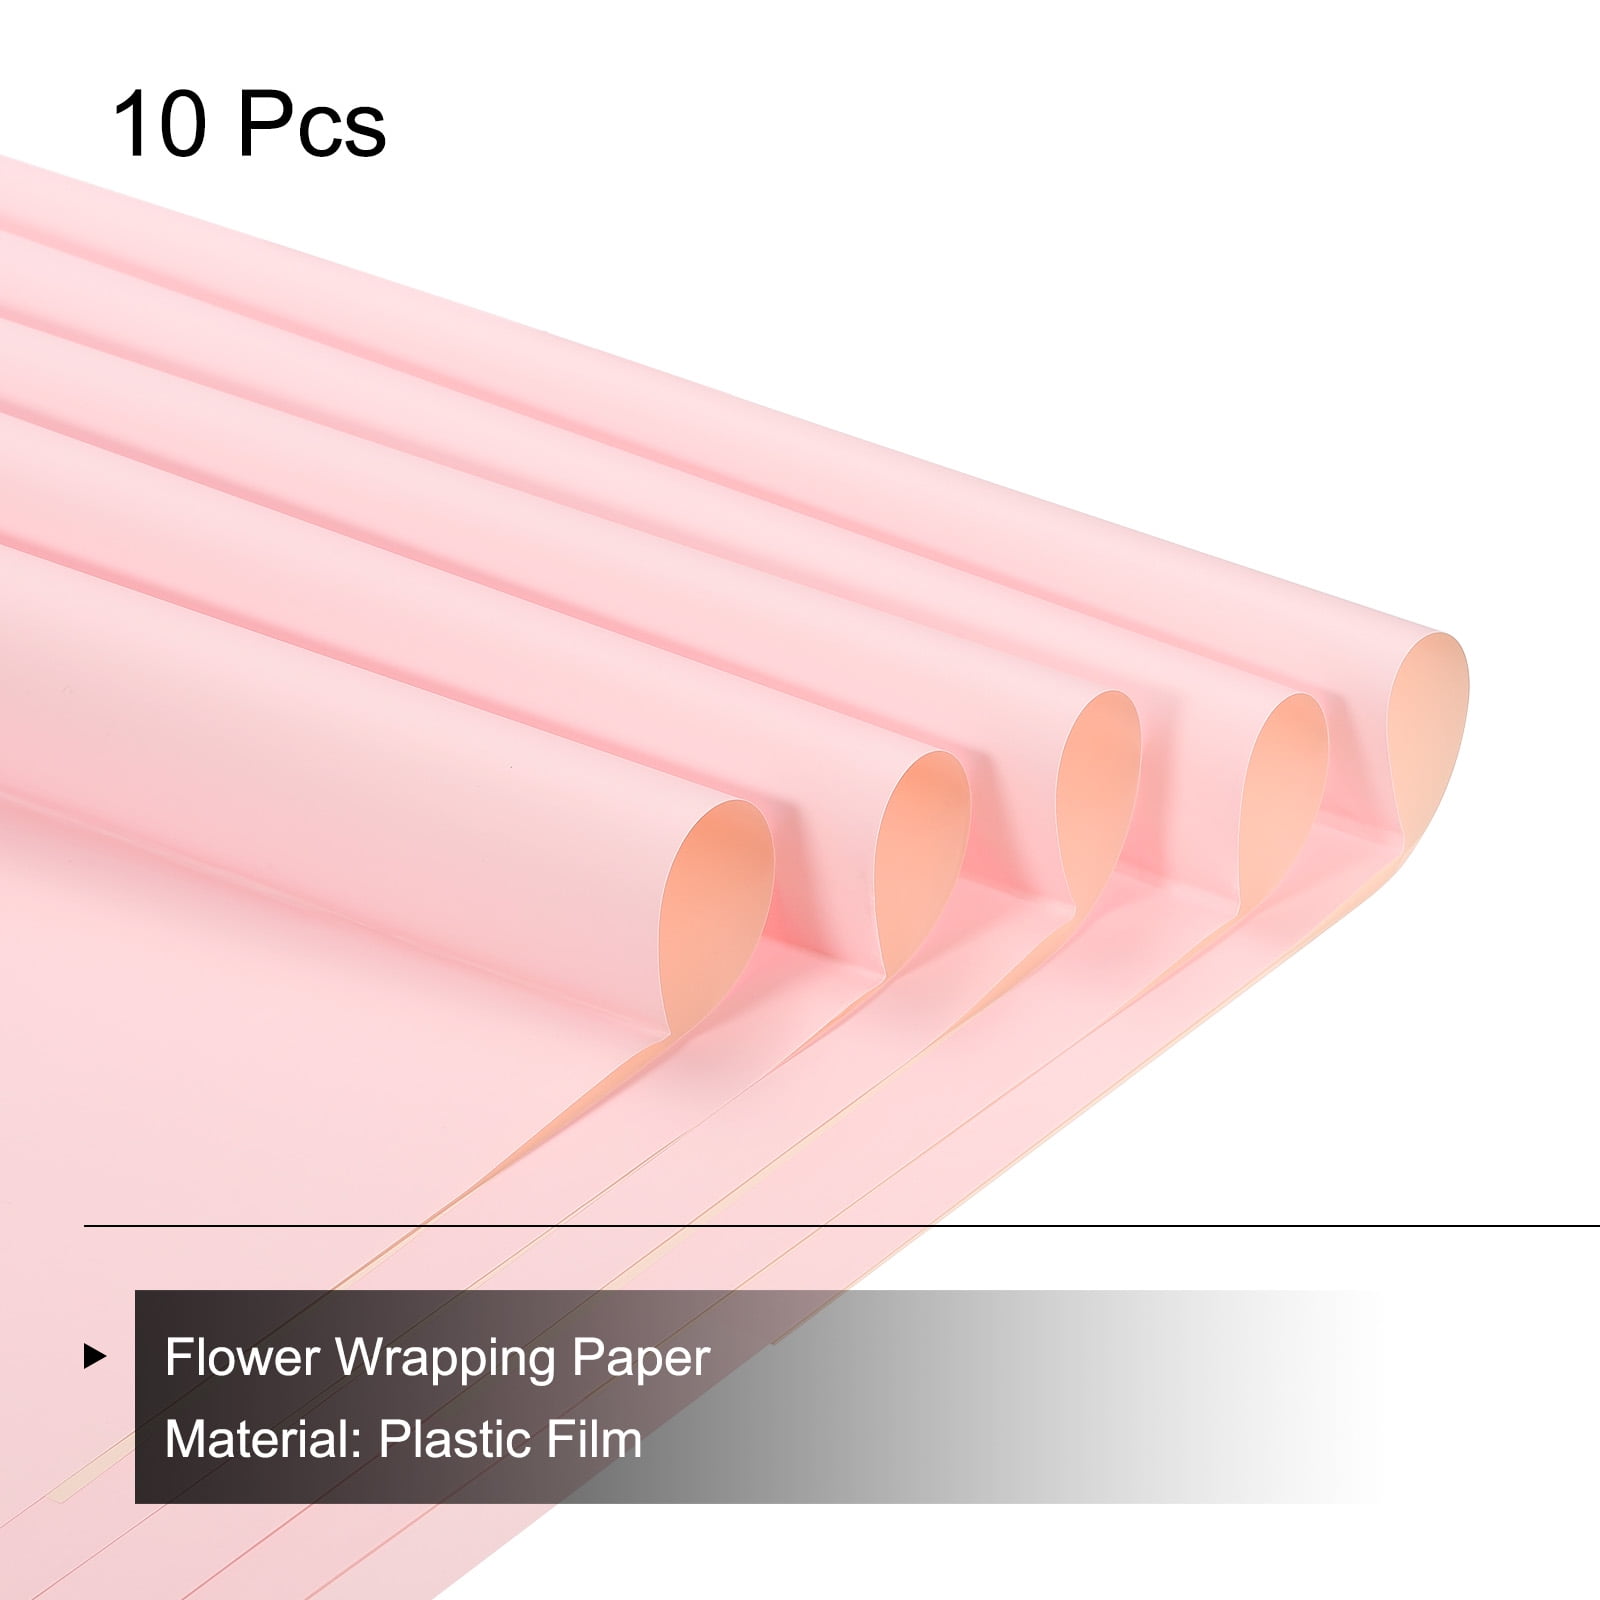 Double Sided Color Flower Wrapping Paper Light Pink+Light Blue 22.8x22.8  Waterproof 10 Pack 